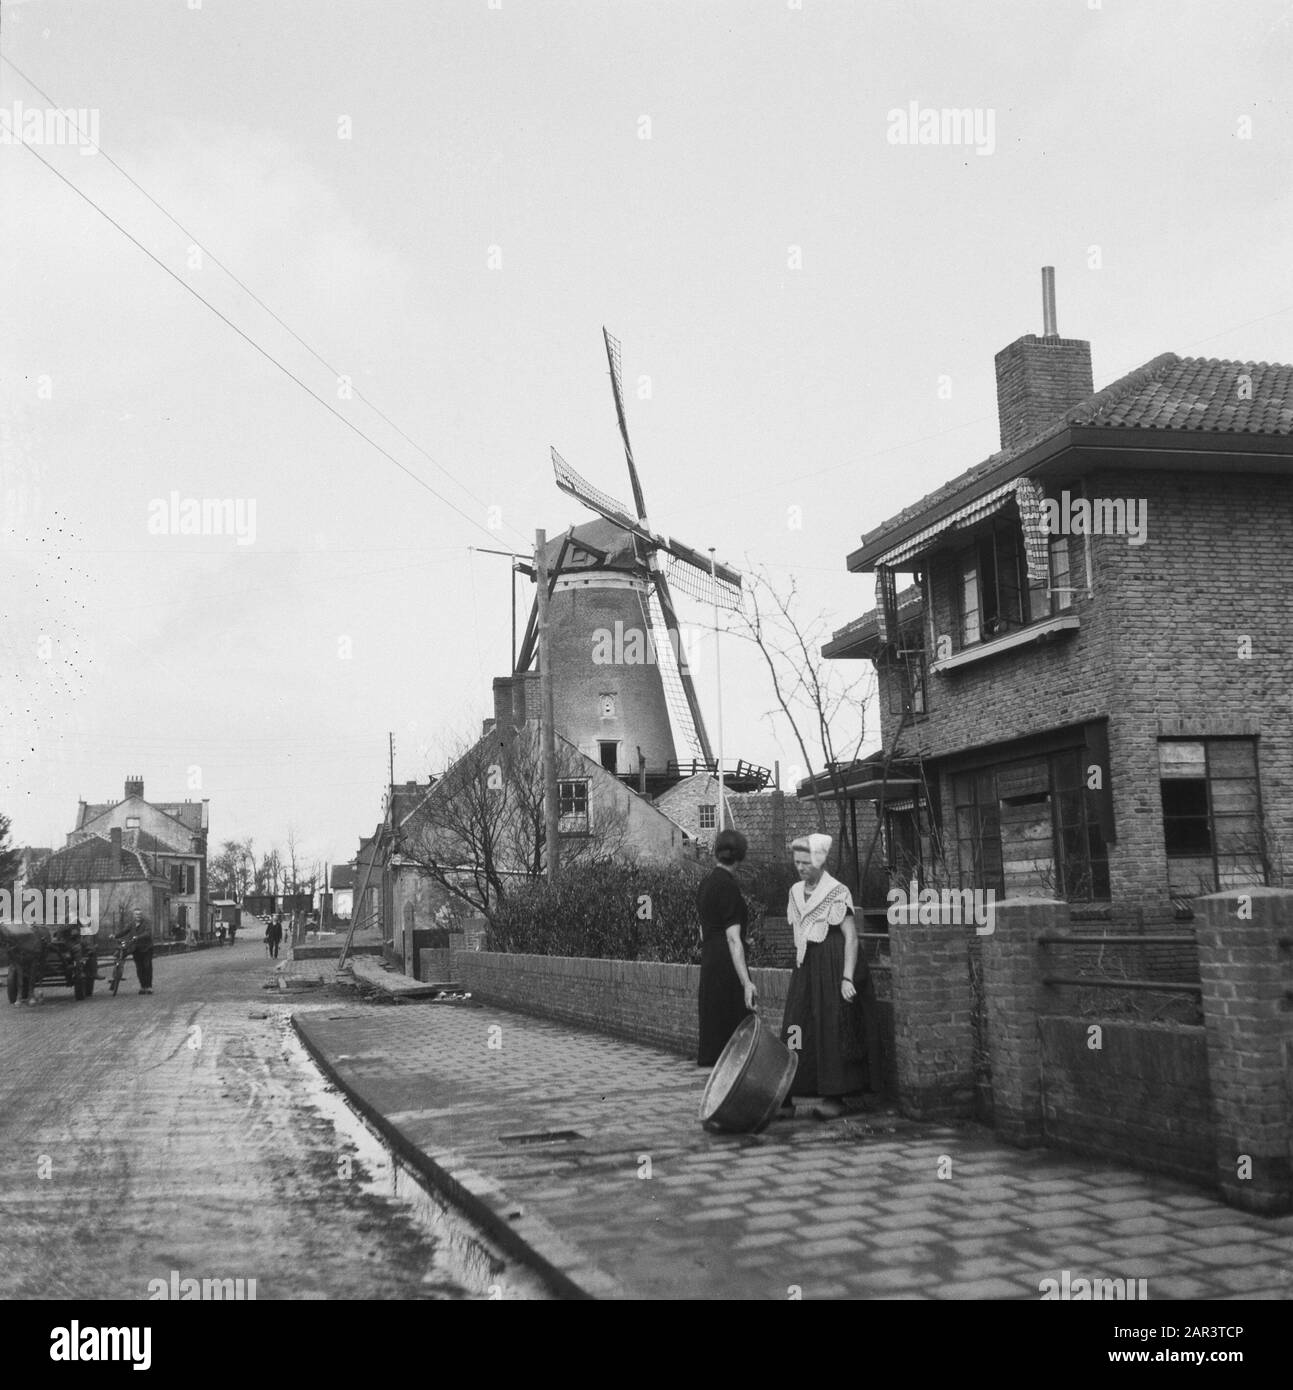 Walcheren: Herstelling Nollegat in the seawall and other places in Walcheren  Kanaalstraat in Oost-Souburg. Doctor's house with mill. Date: 1945 Location: Oost-Souburg, Zeeland Keywords: buildings, repairs, mill, destruction, reconstruction Stock Photo